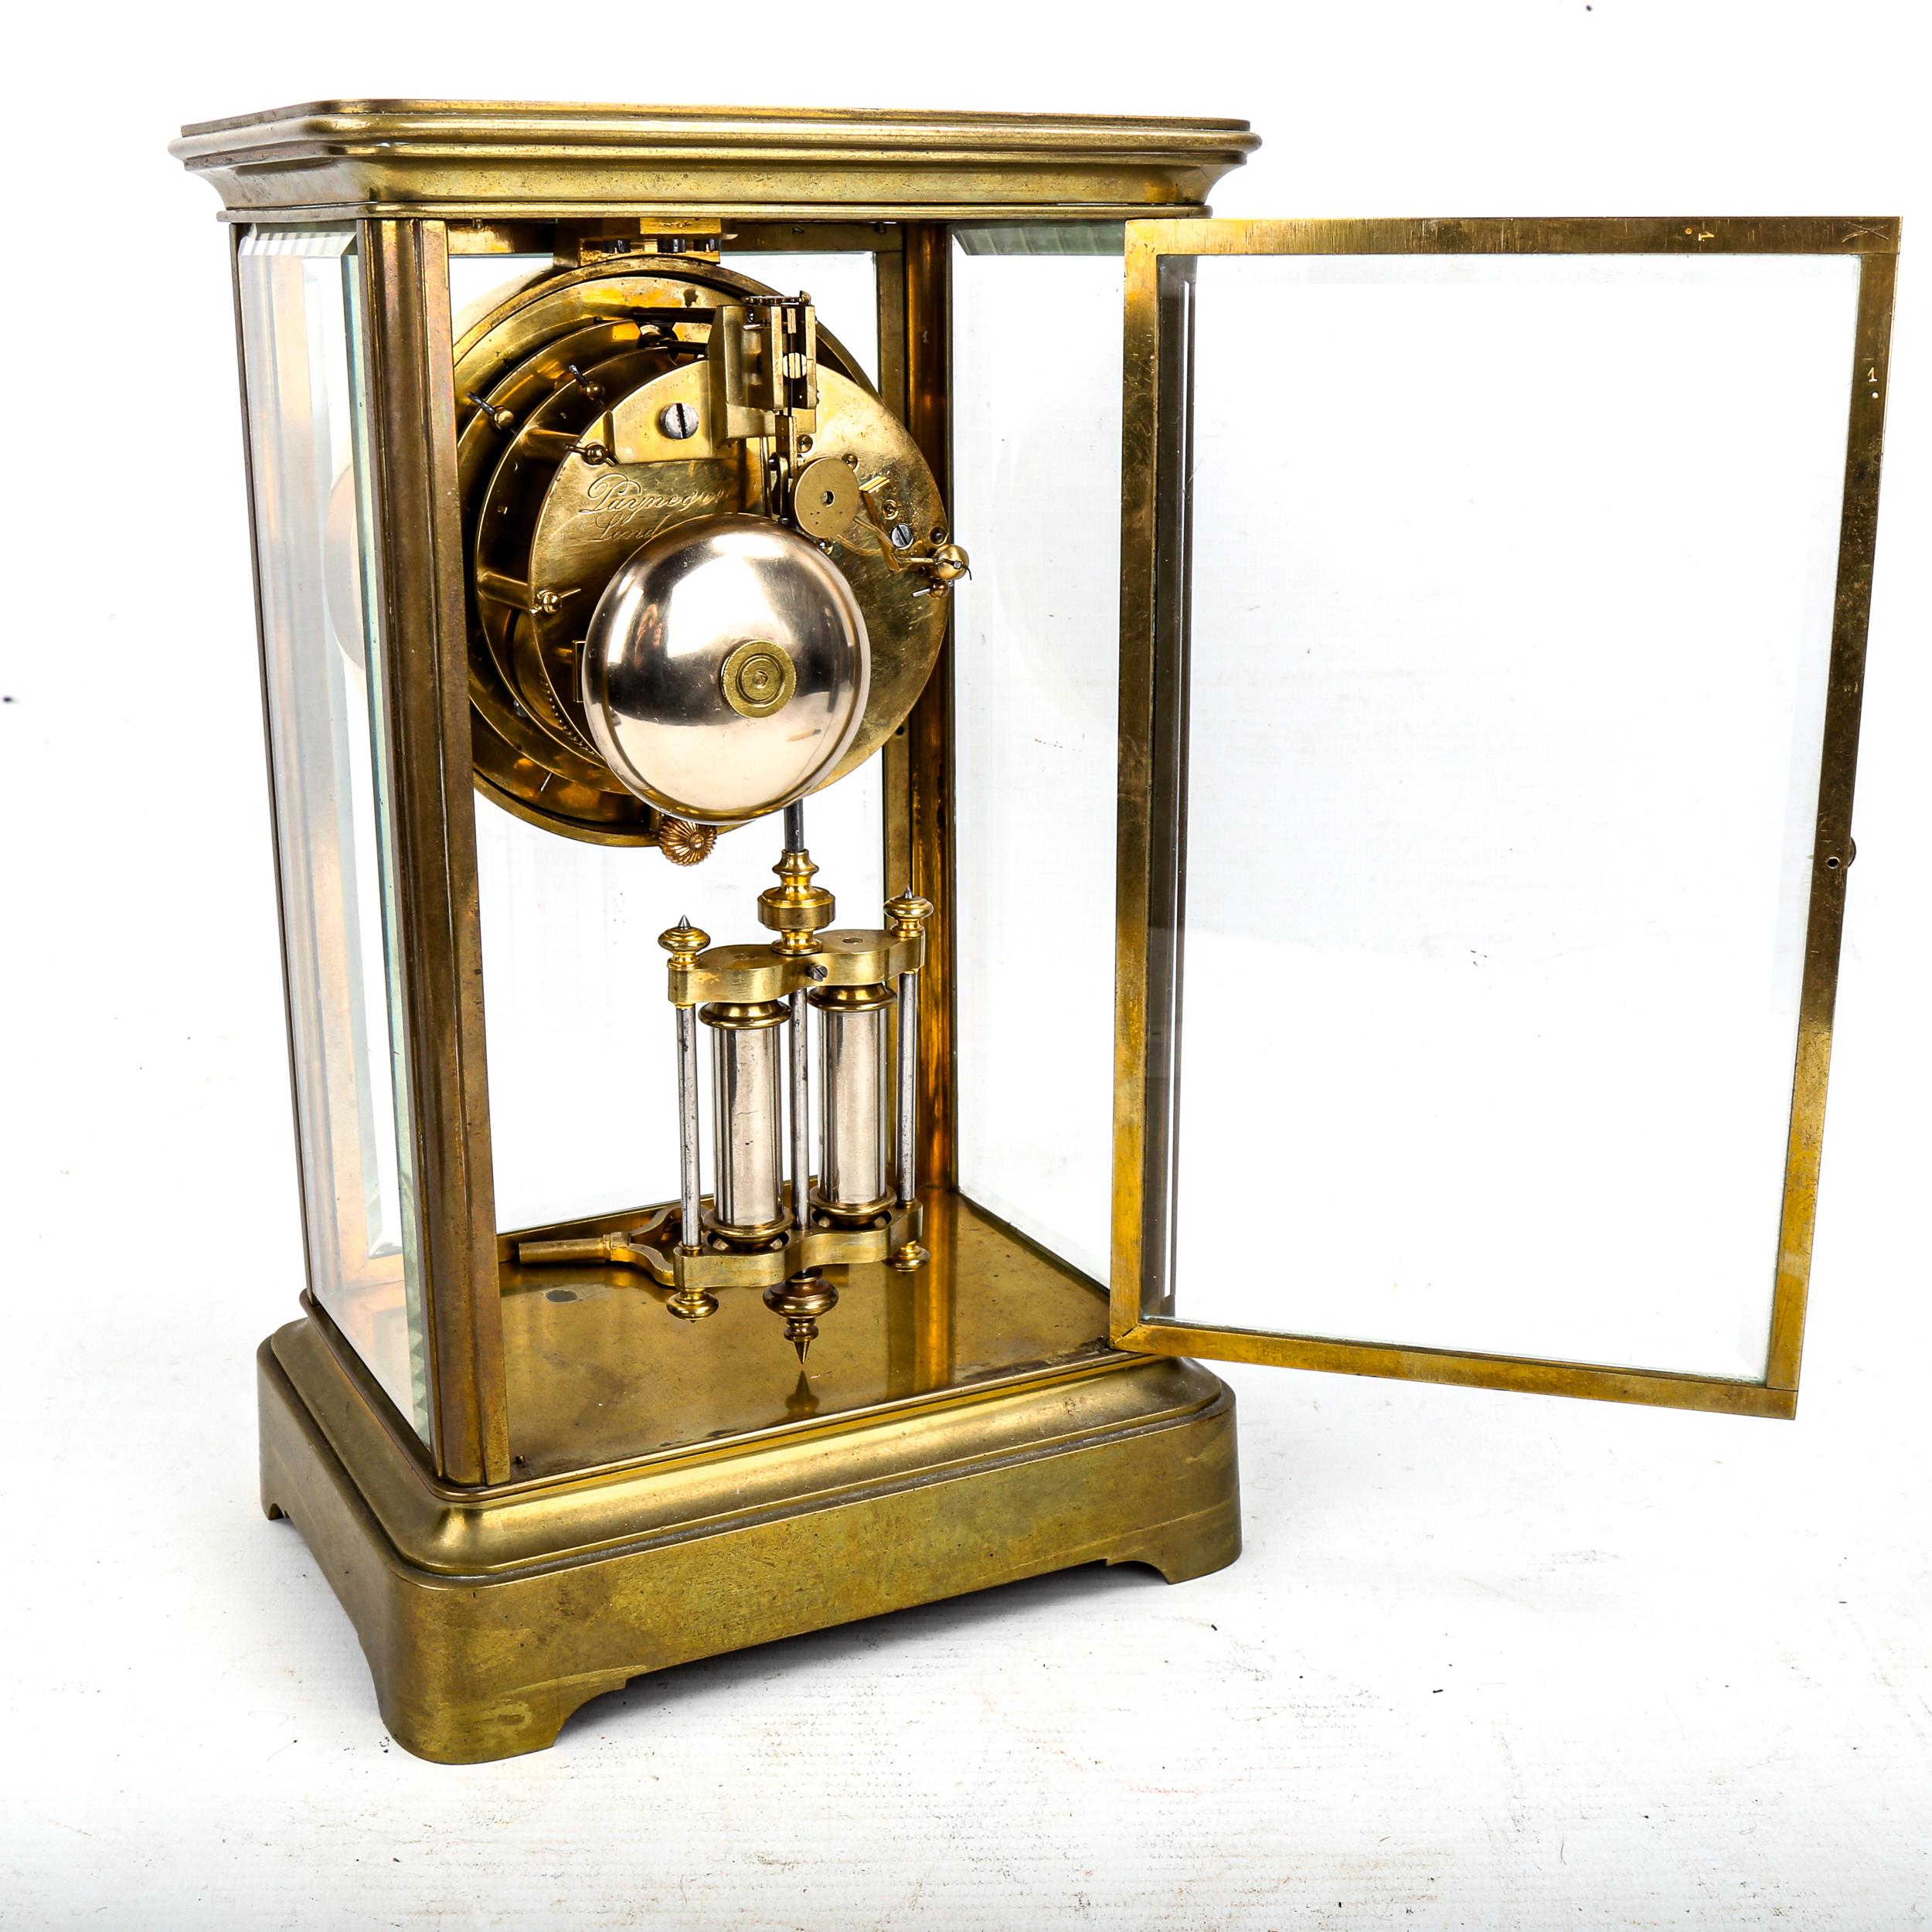 An early 20th century brass-cased 4-glass 8-day mantel clock, by Payne & Co of London, white - Image 2 of 5